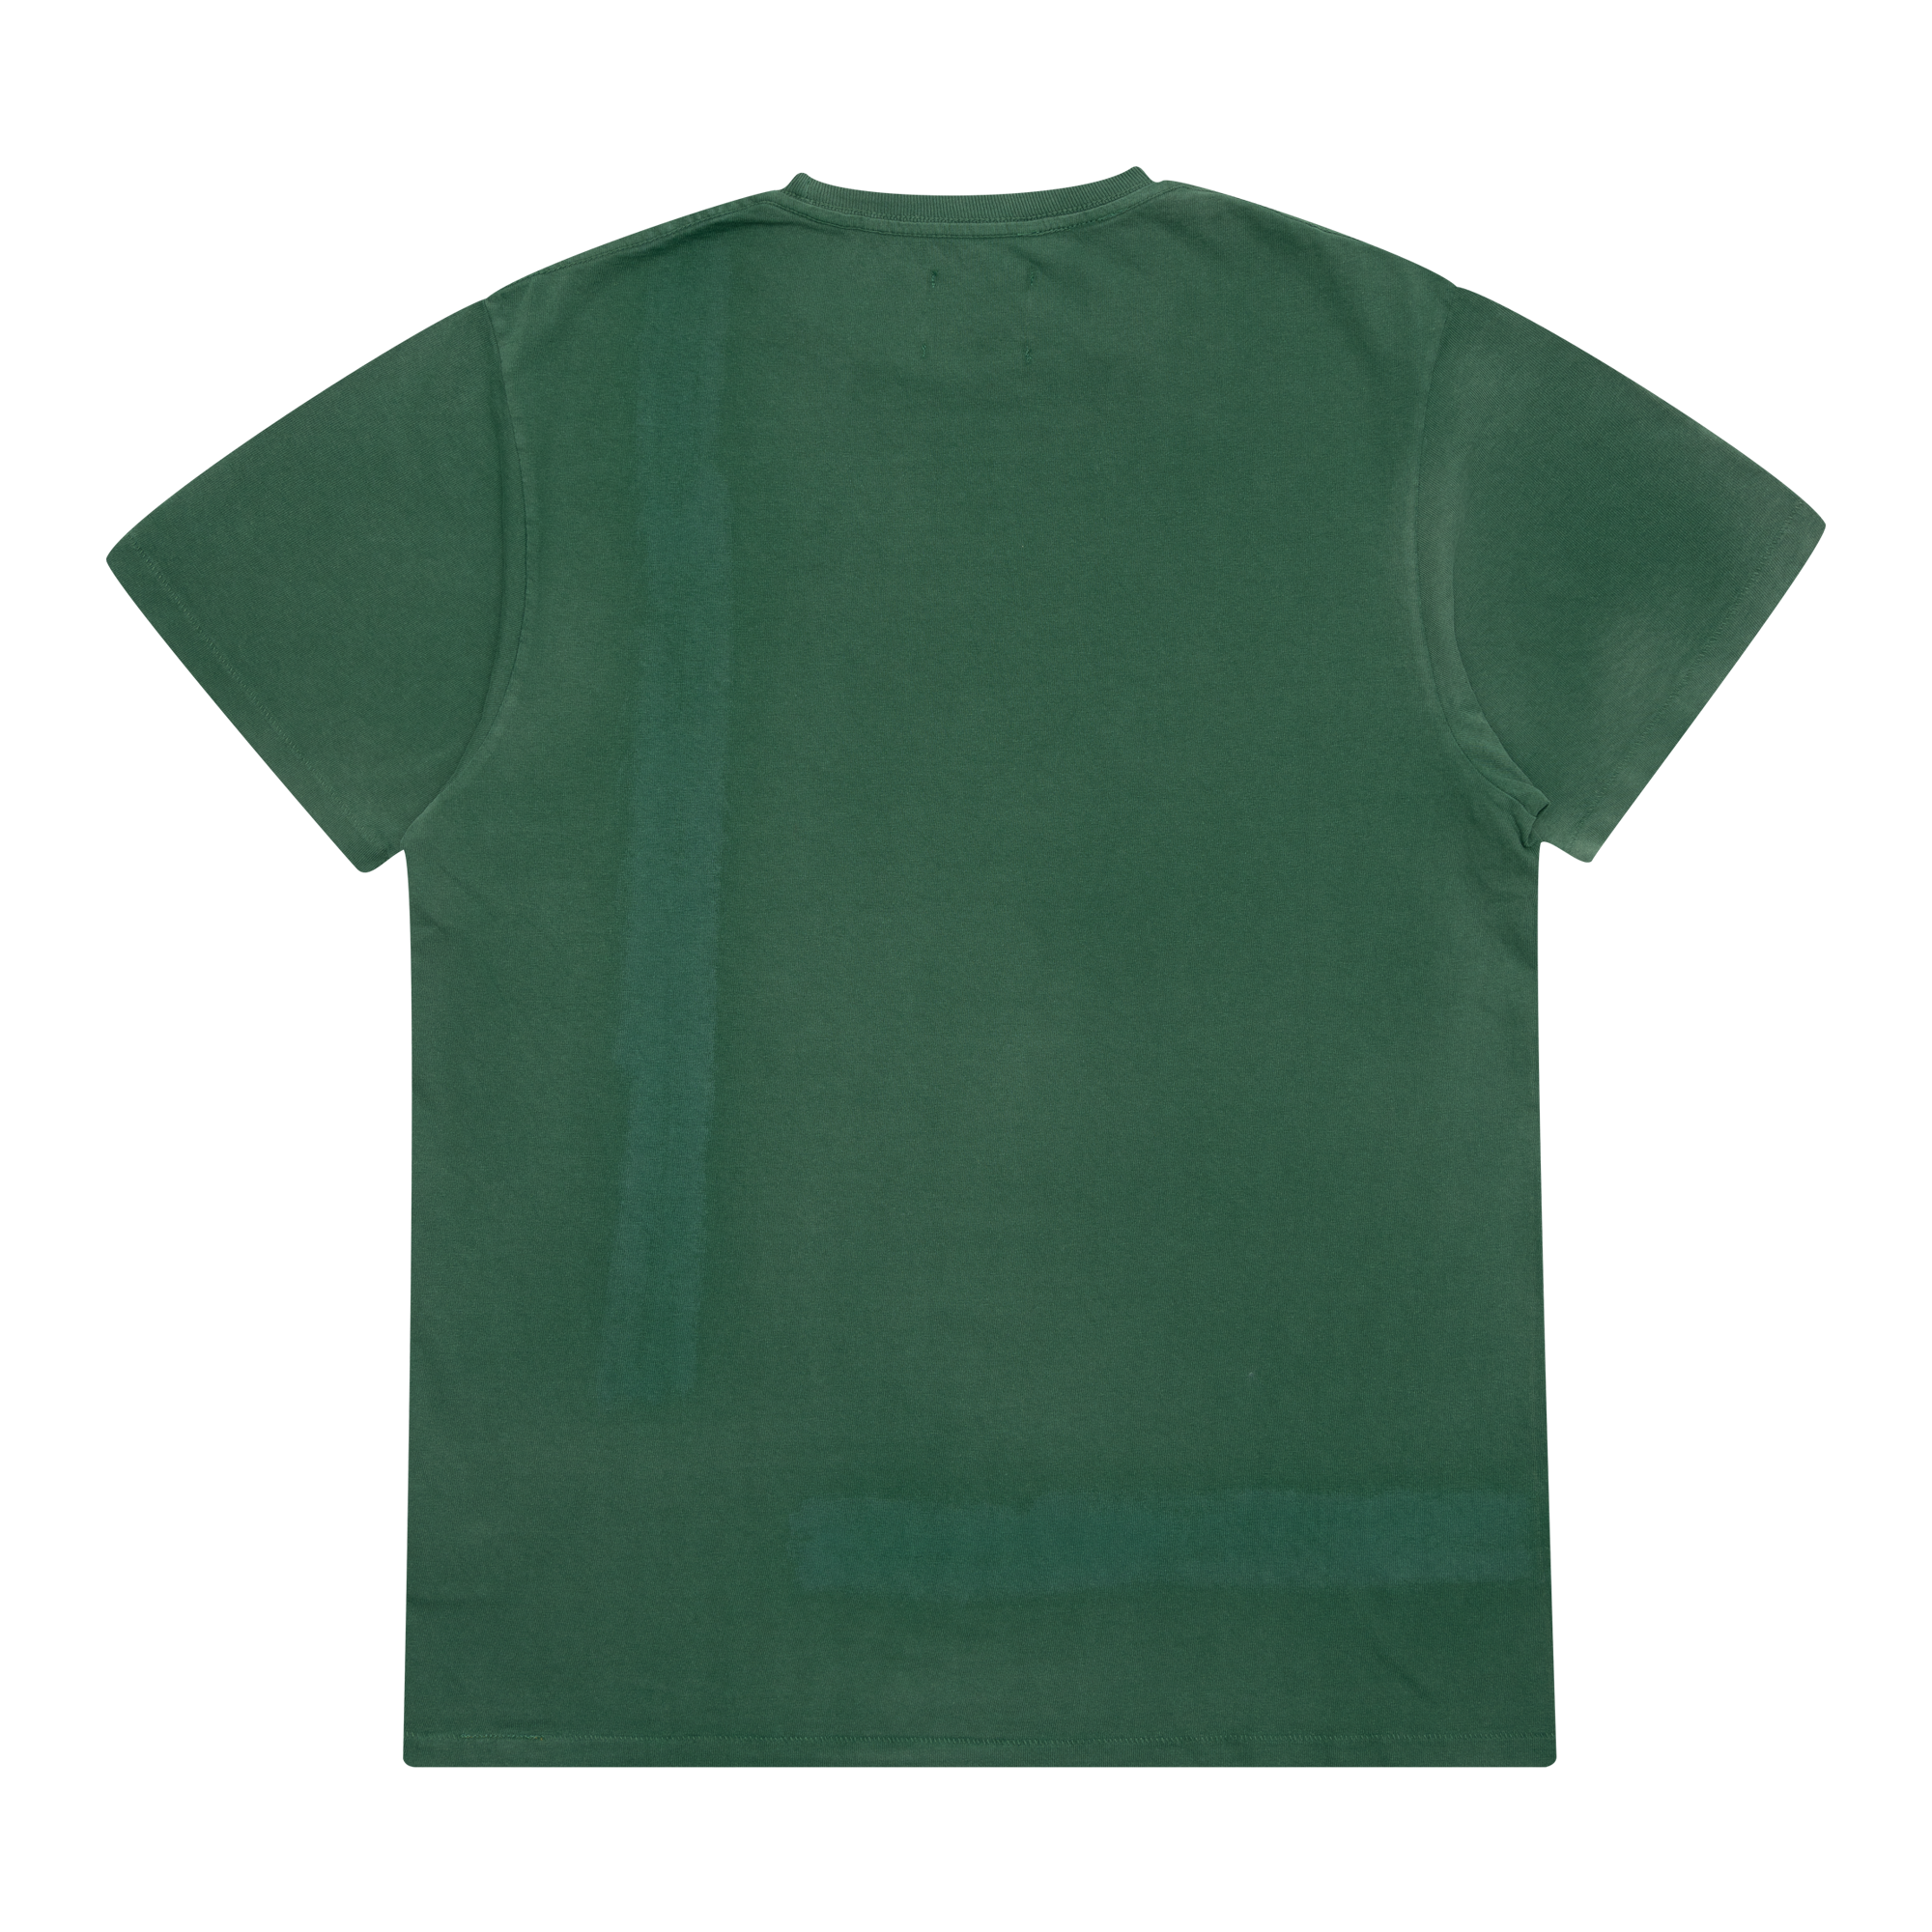 Shop Jeep Fatigue Green Photographic Print Tee for Men from